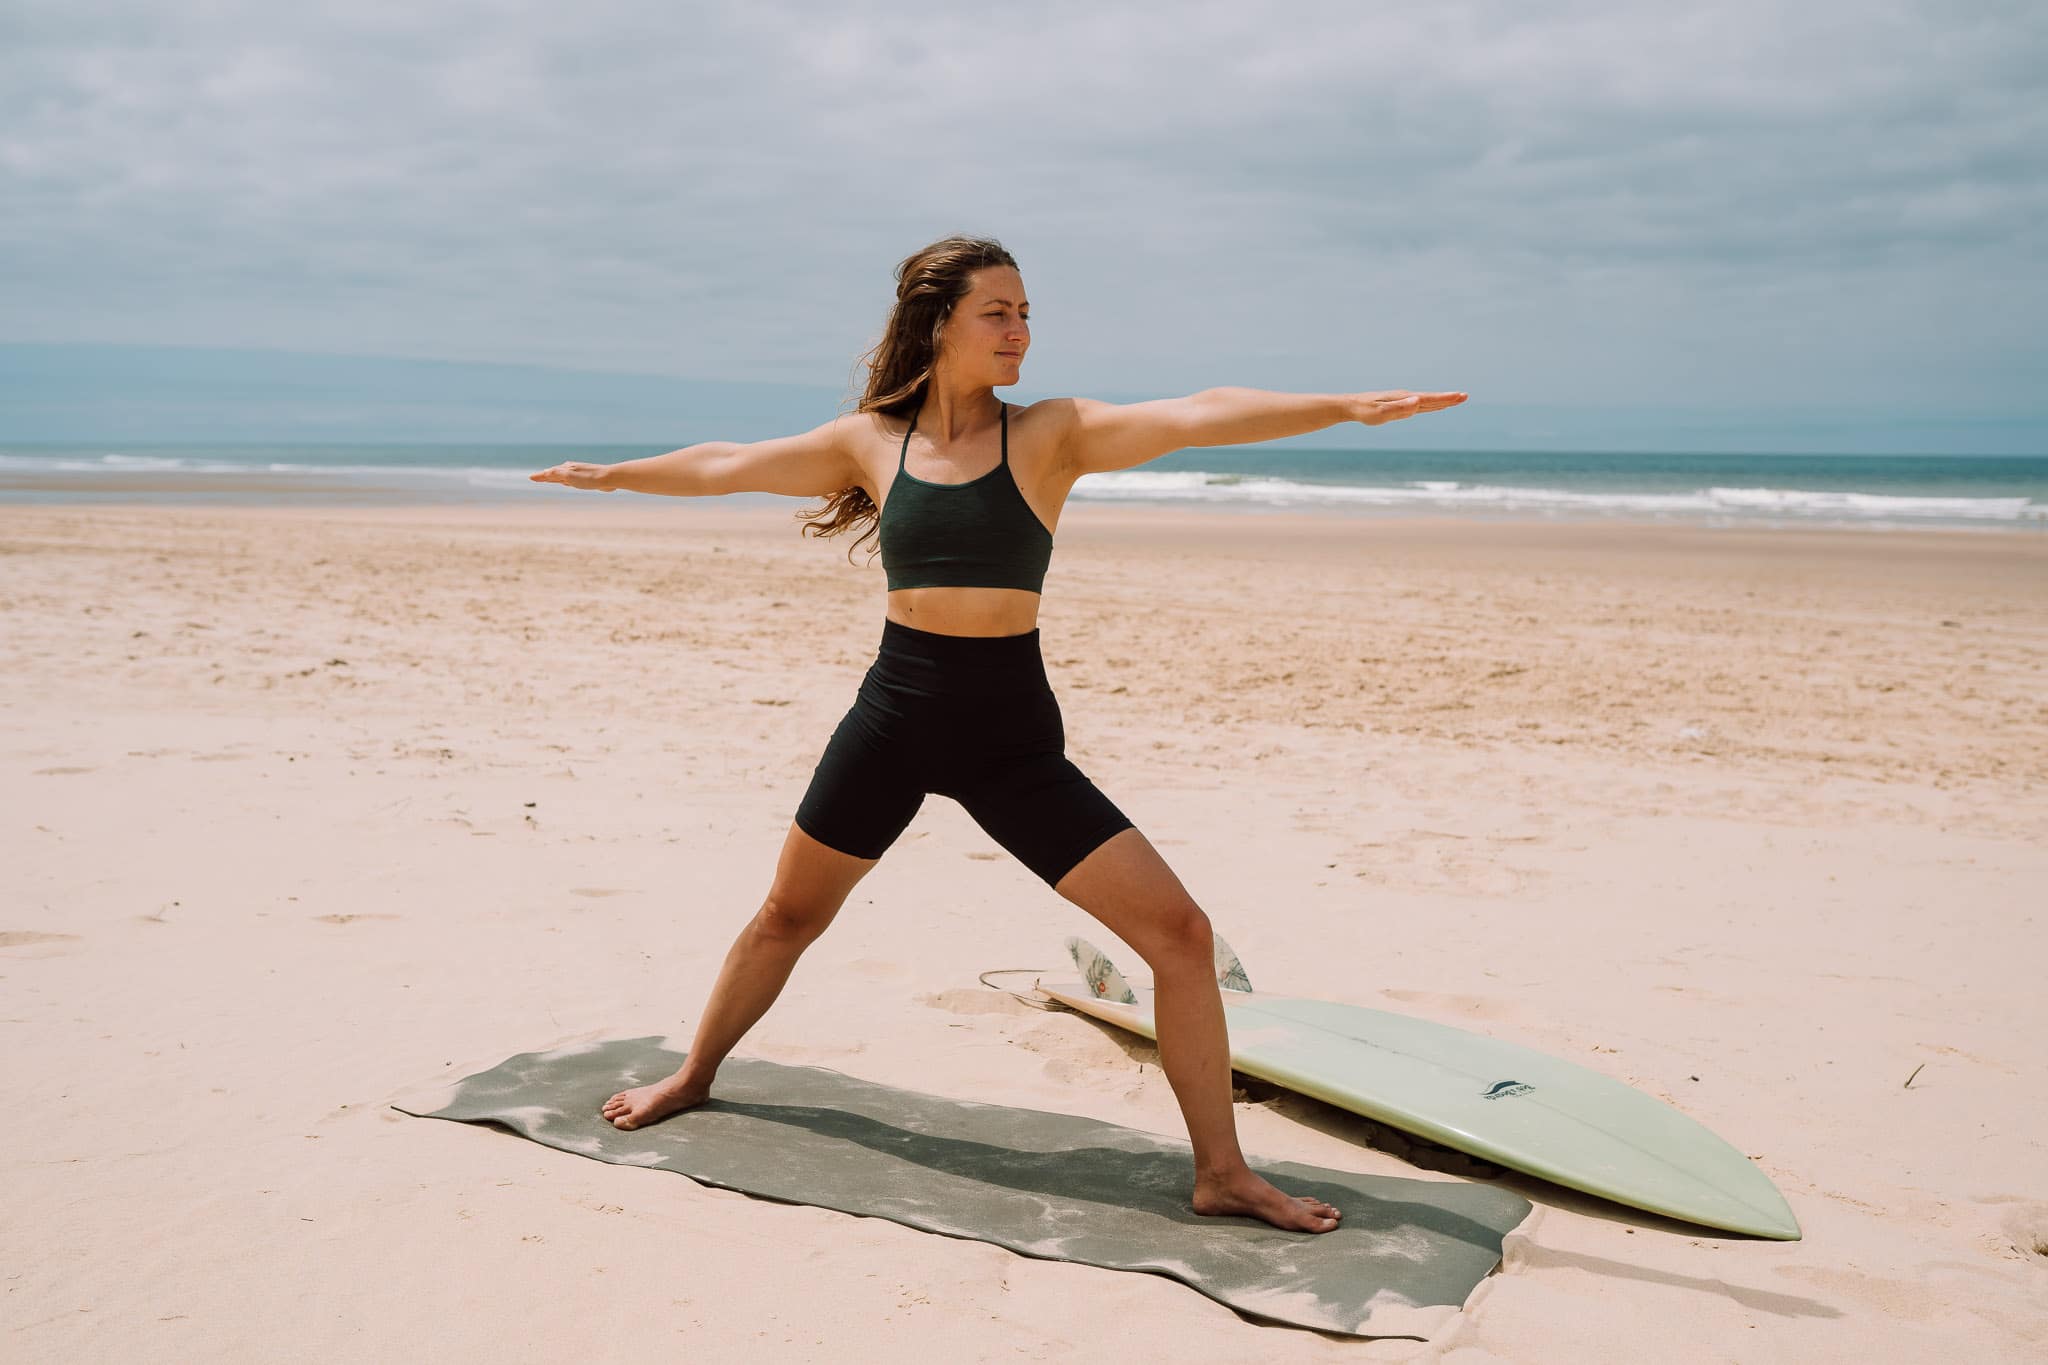 Yoga for Surfers: Post-Surf Stretch - Women + Waves